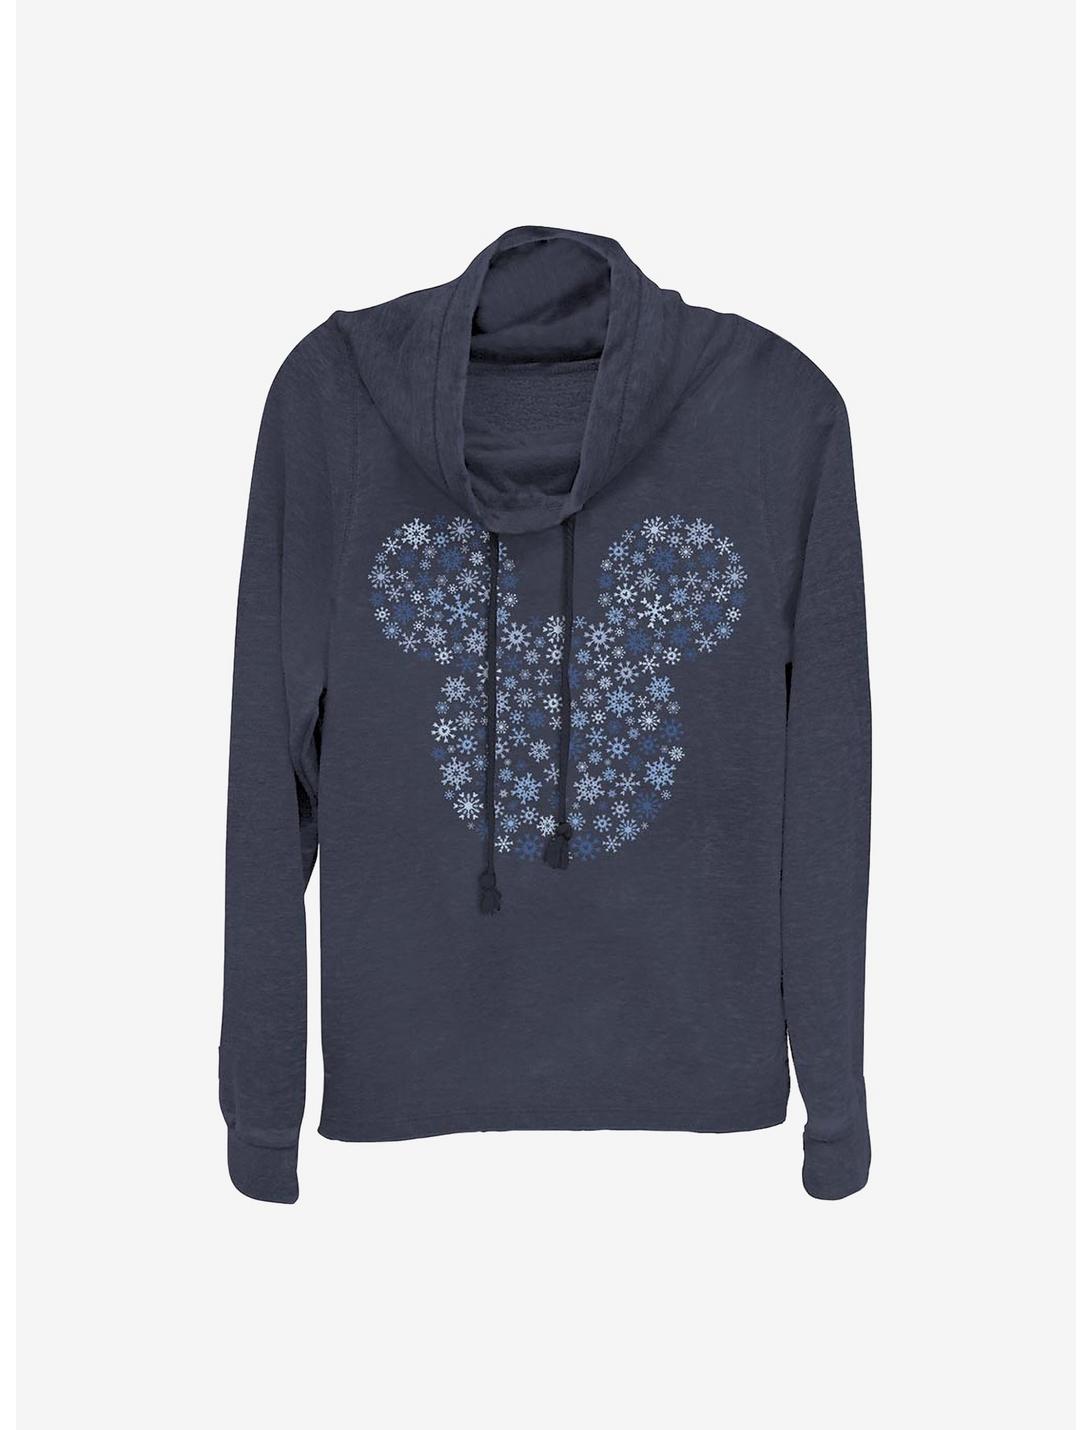 Disney Mickey Mouse Mickey Ear Snowflakes Cowlneck Long-Sleeve Girls Top, NAVY, hi-res